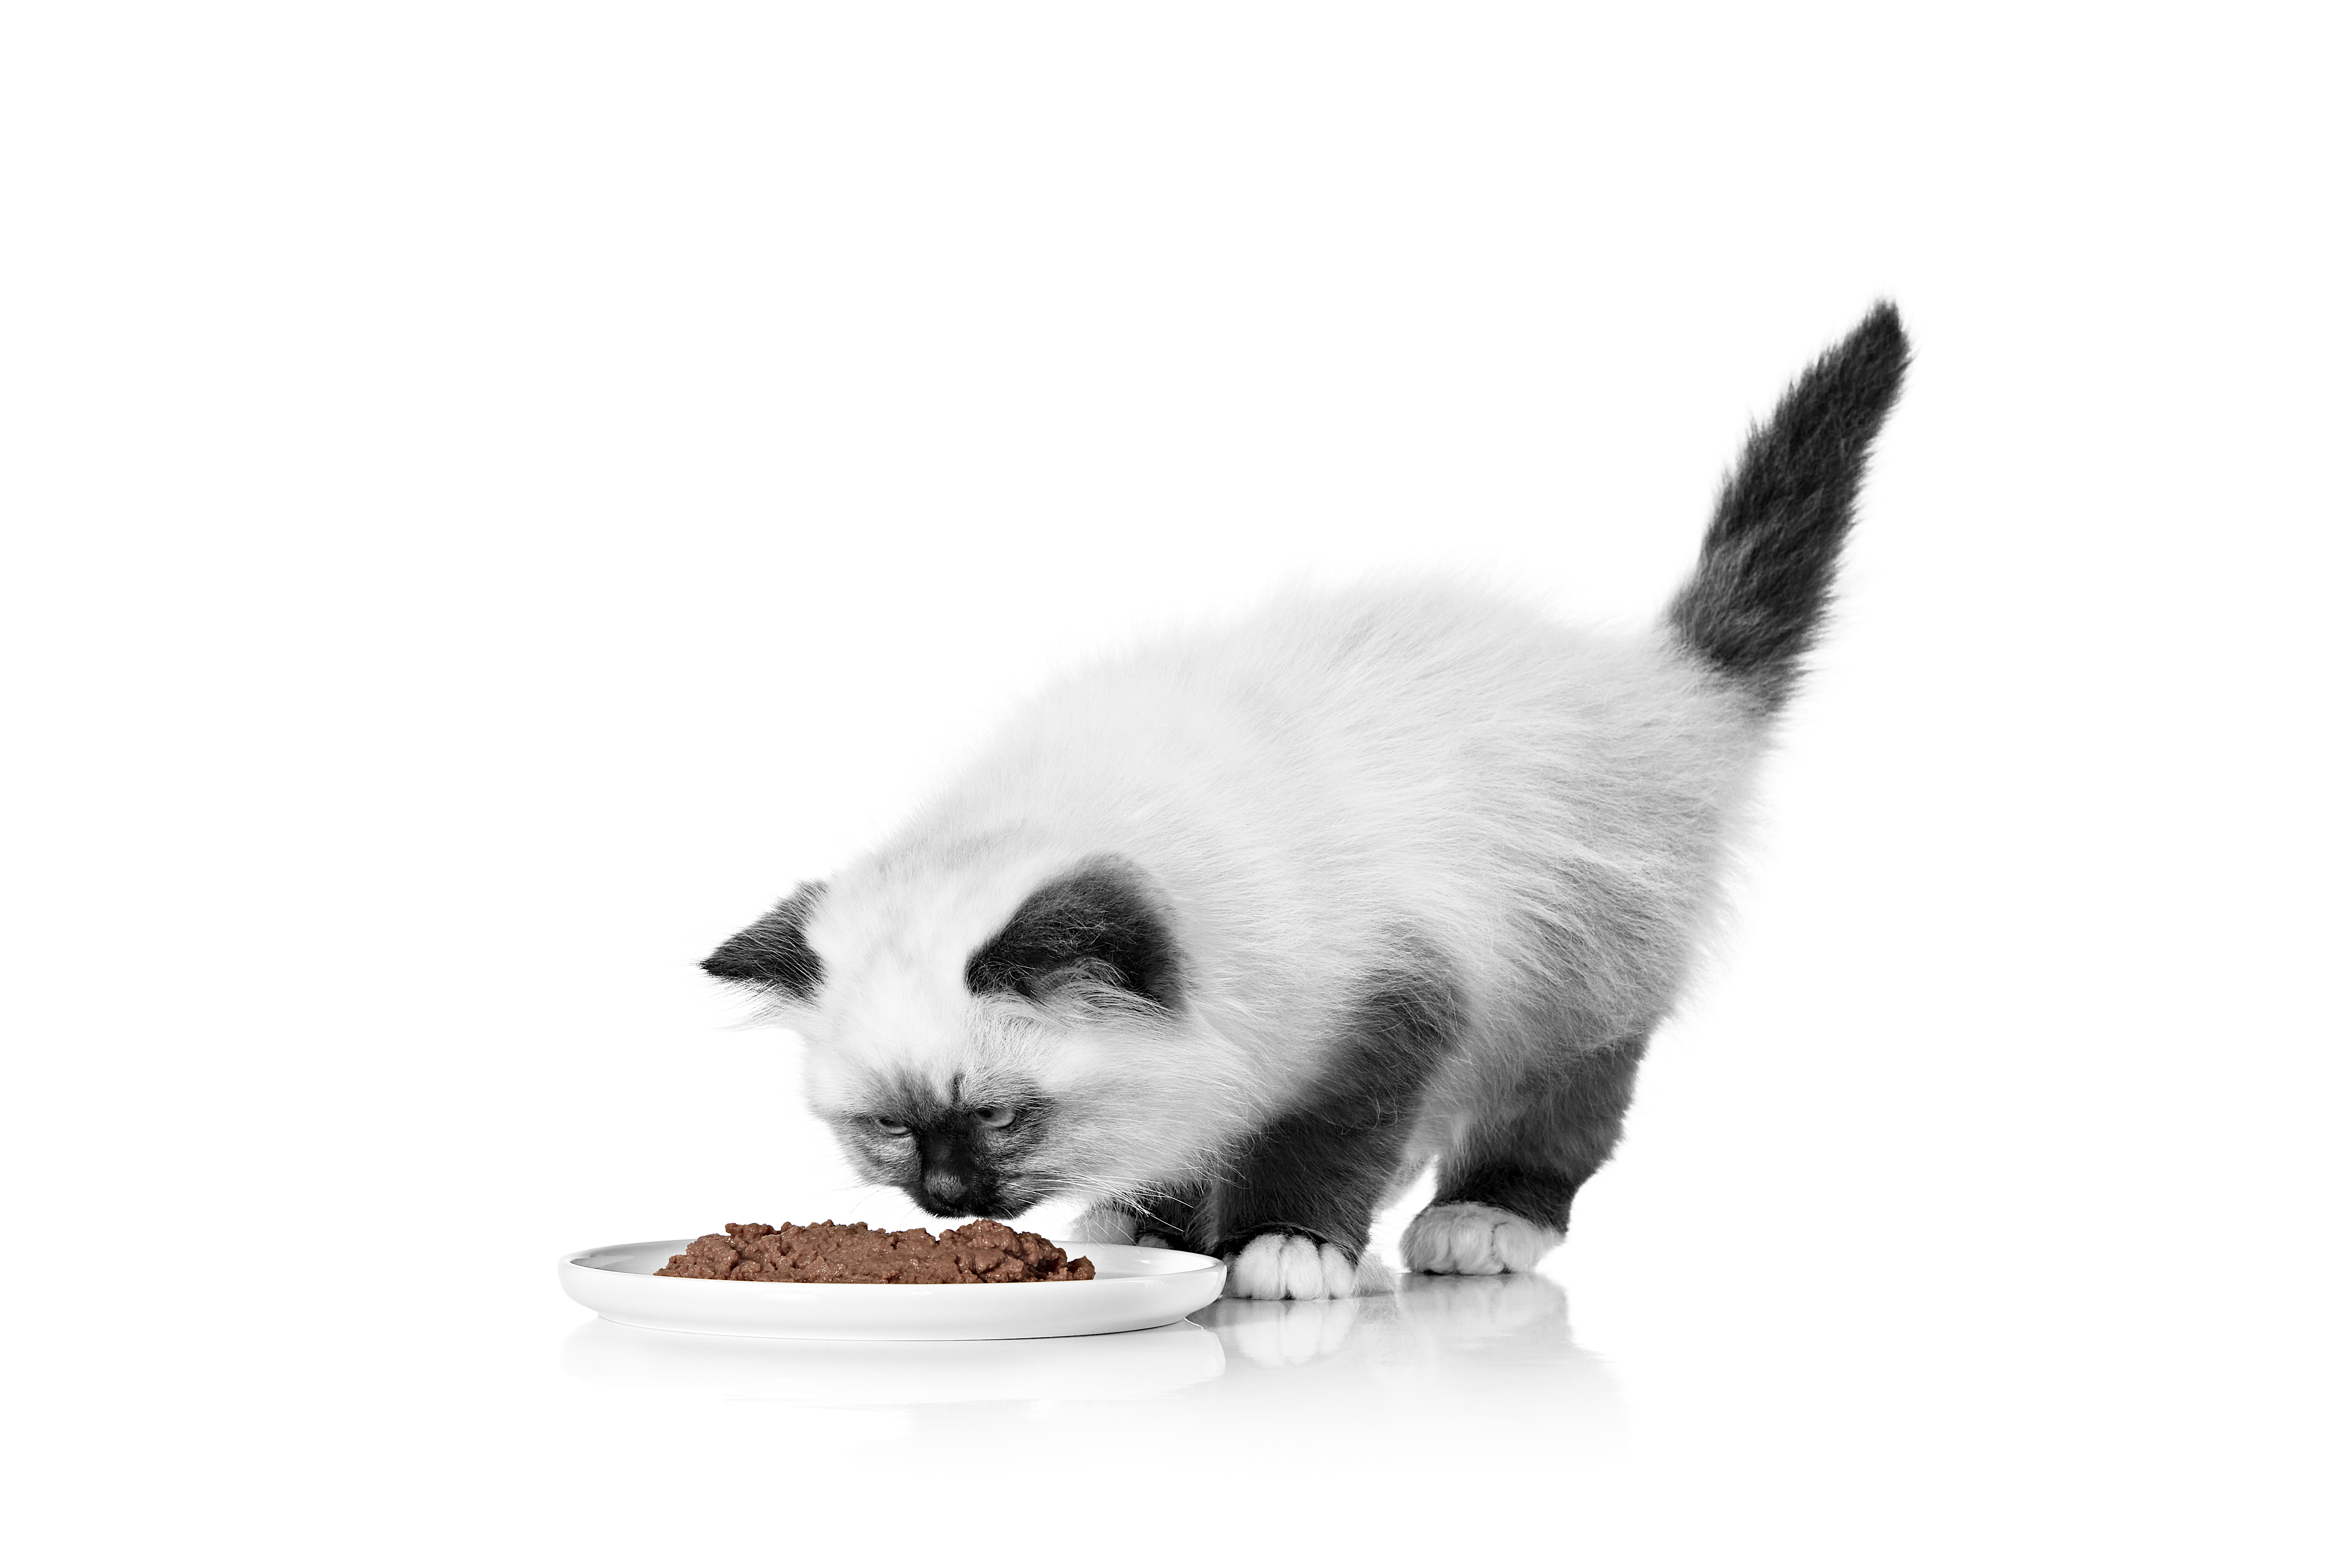 Sacred Birman kitten eating wet food in black and white on a white background